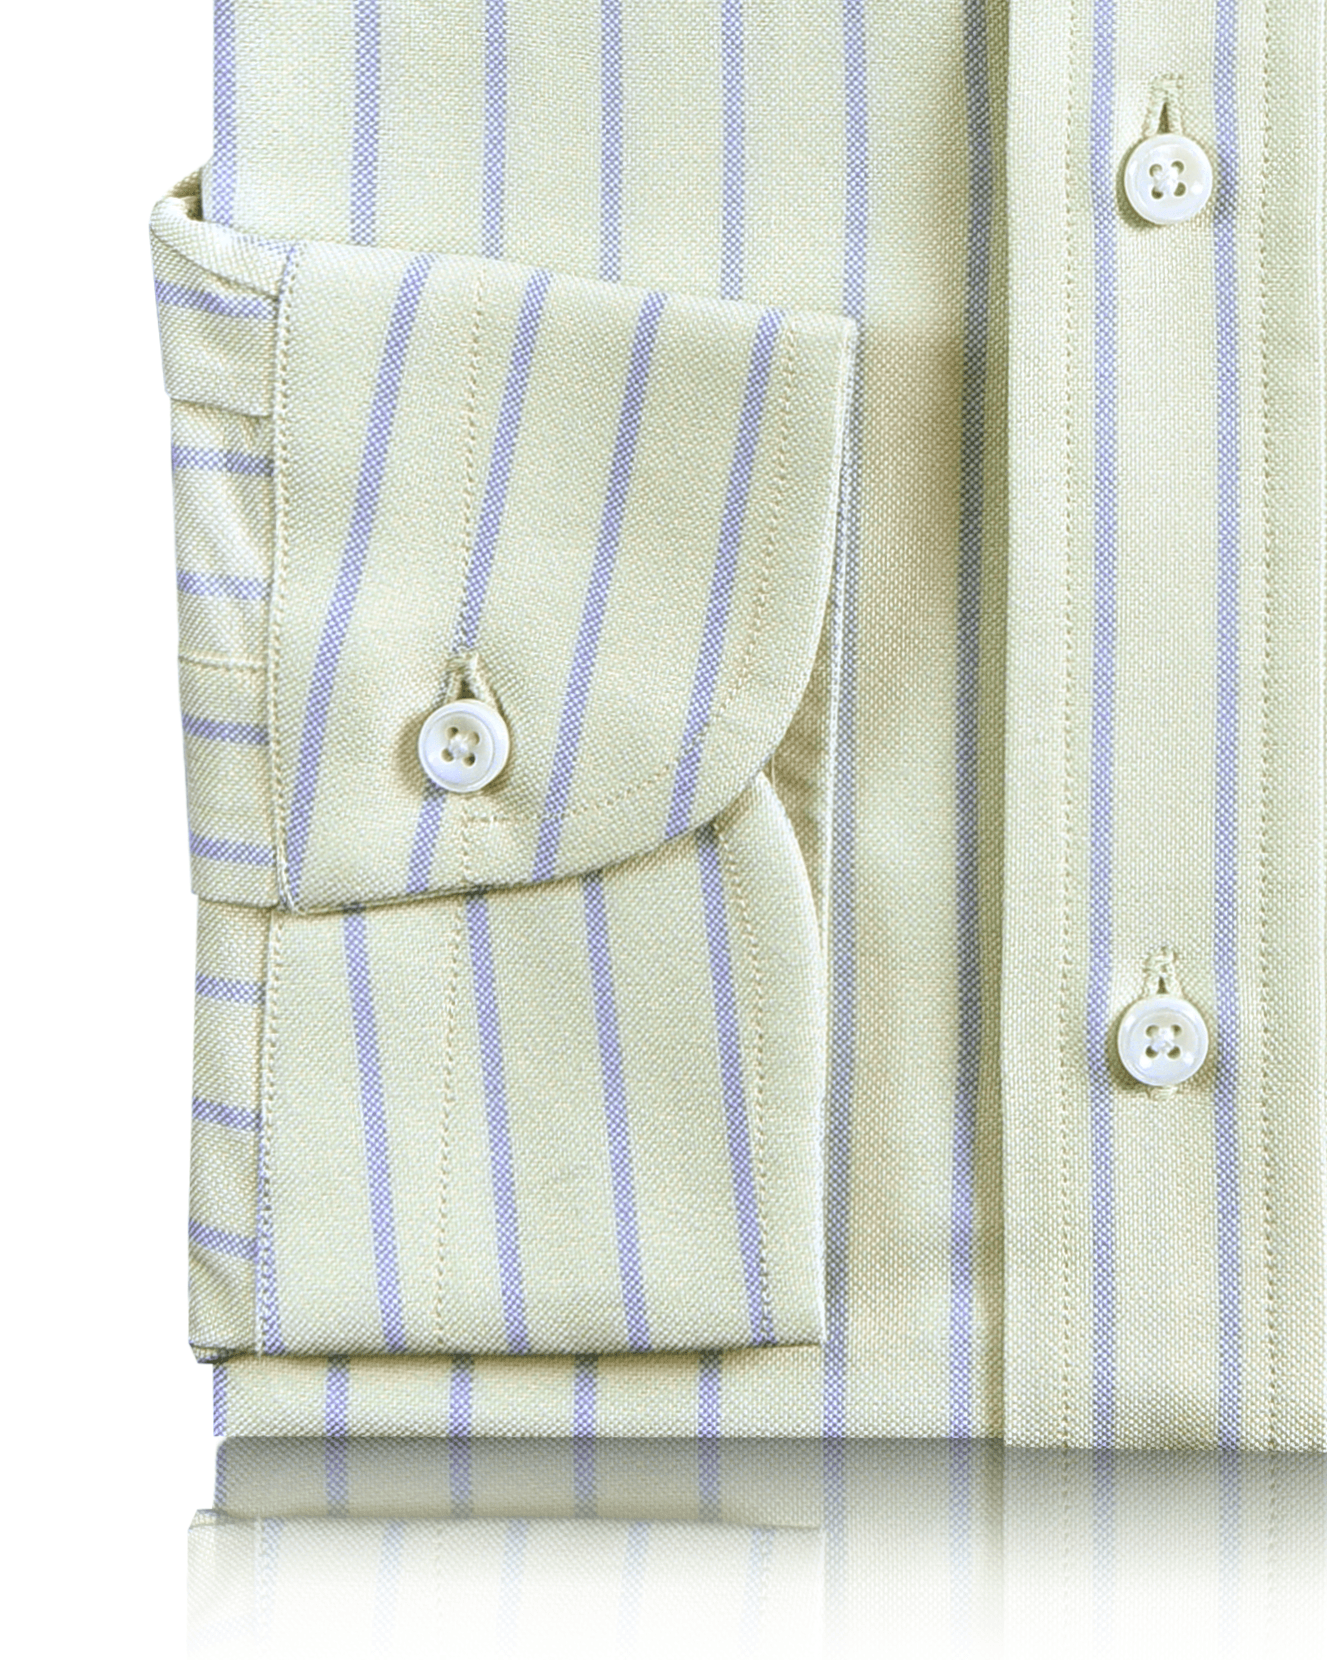 Cuff of the custom oxford shirt for men by Luxire in moss green with blue stripes